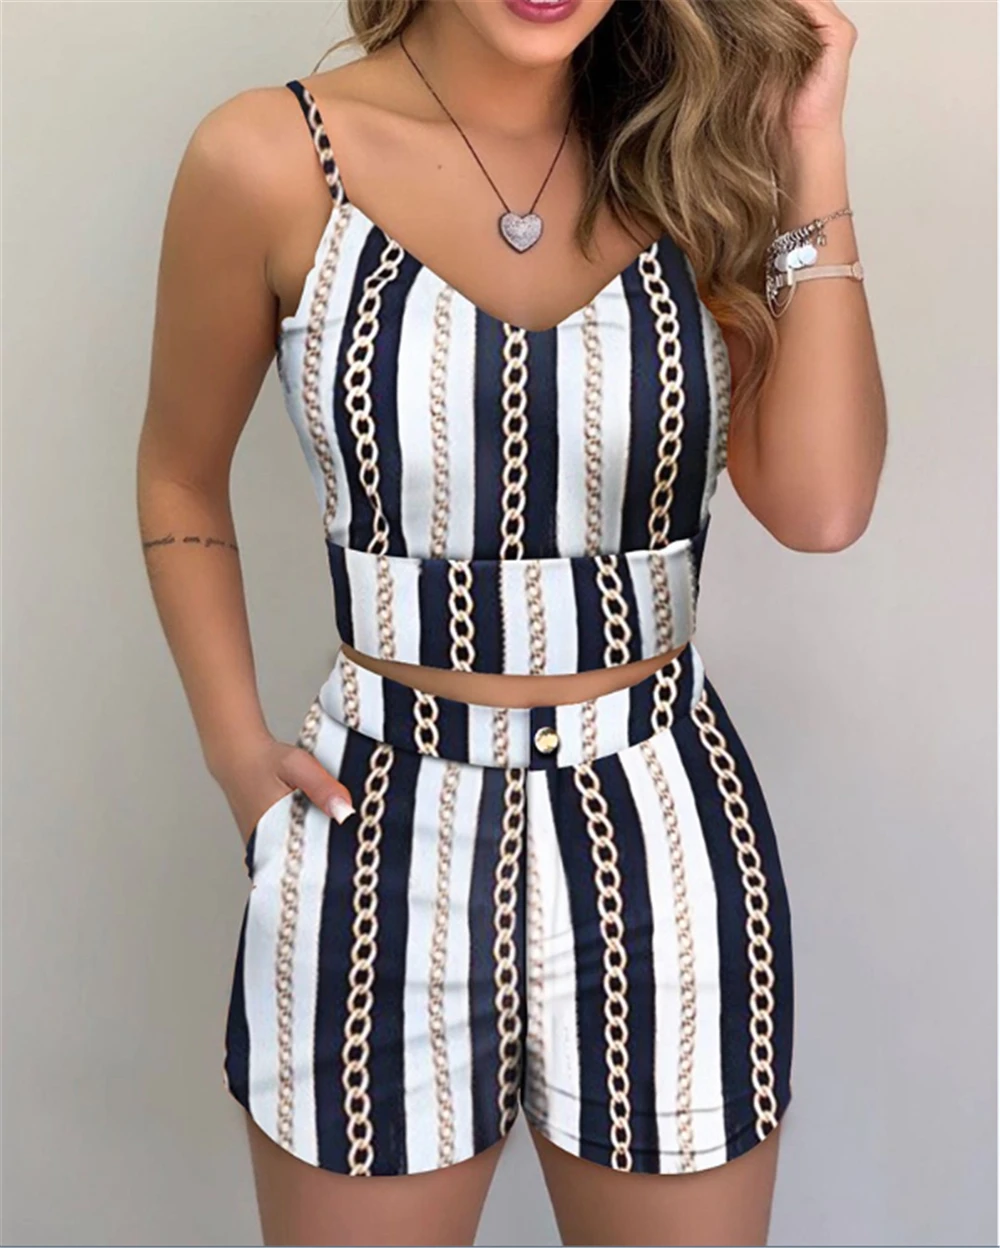 cute pj sets Sexy Striped Floral Print Spaghetti Strap Shorts Sets women 2021 Summer new fashion vest Top Tracksuit Casual Two Pieces Suits skirt and top co ord Women's Sets